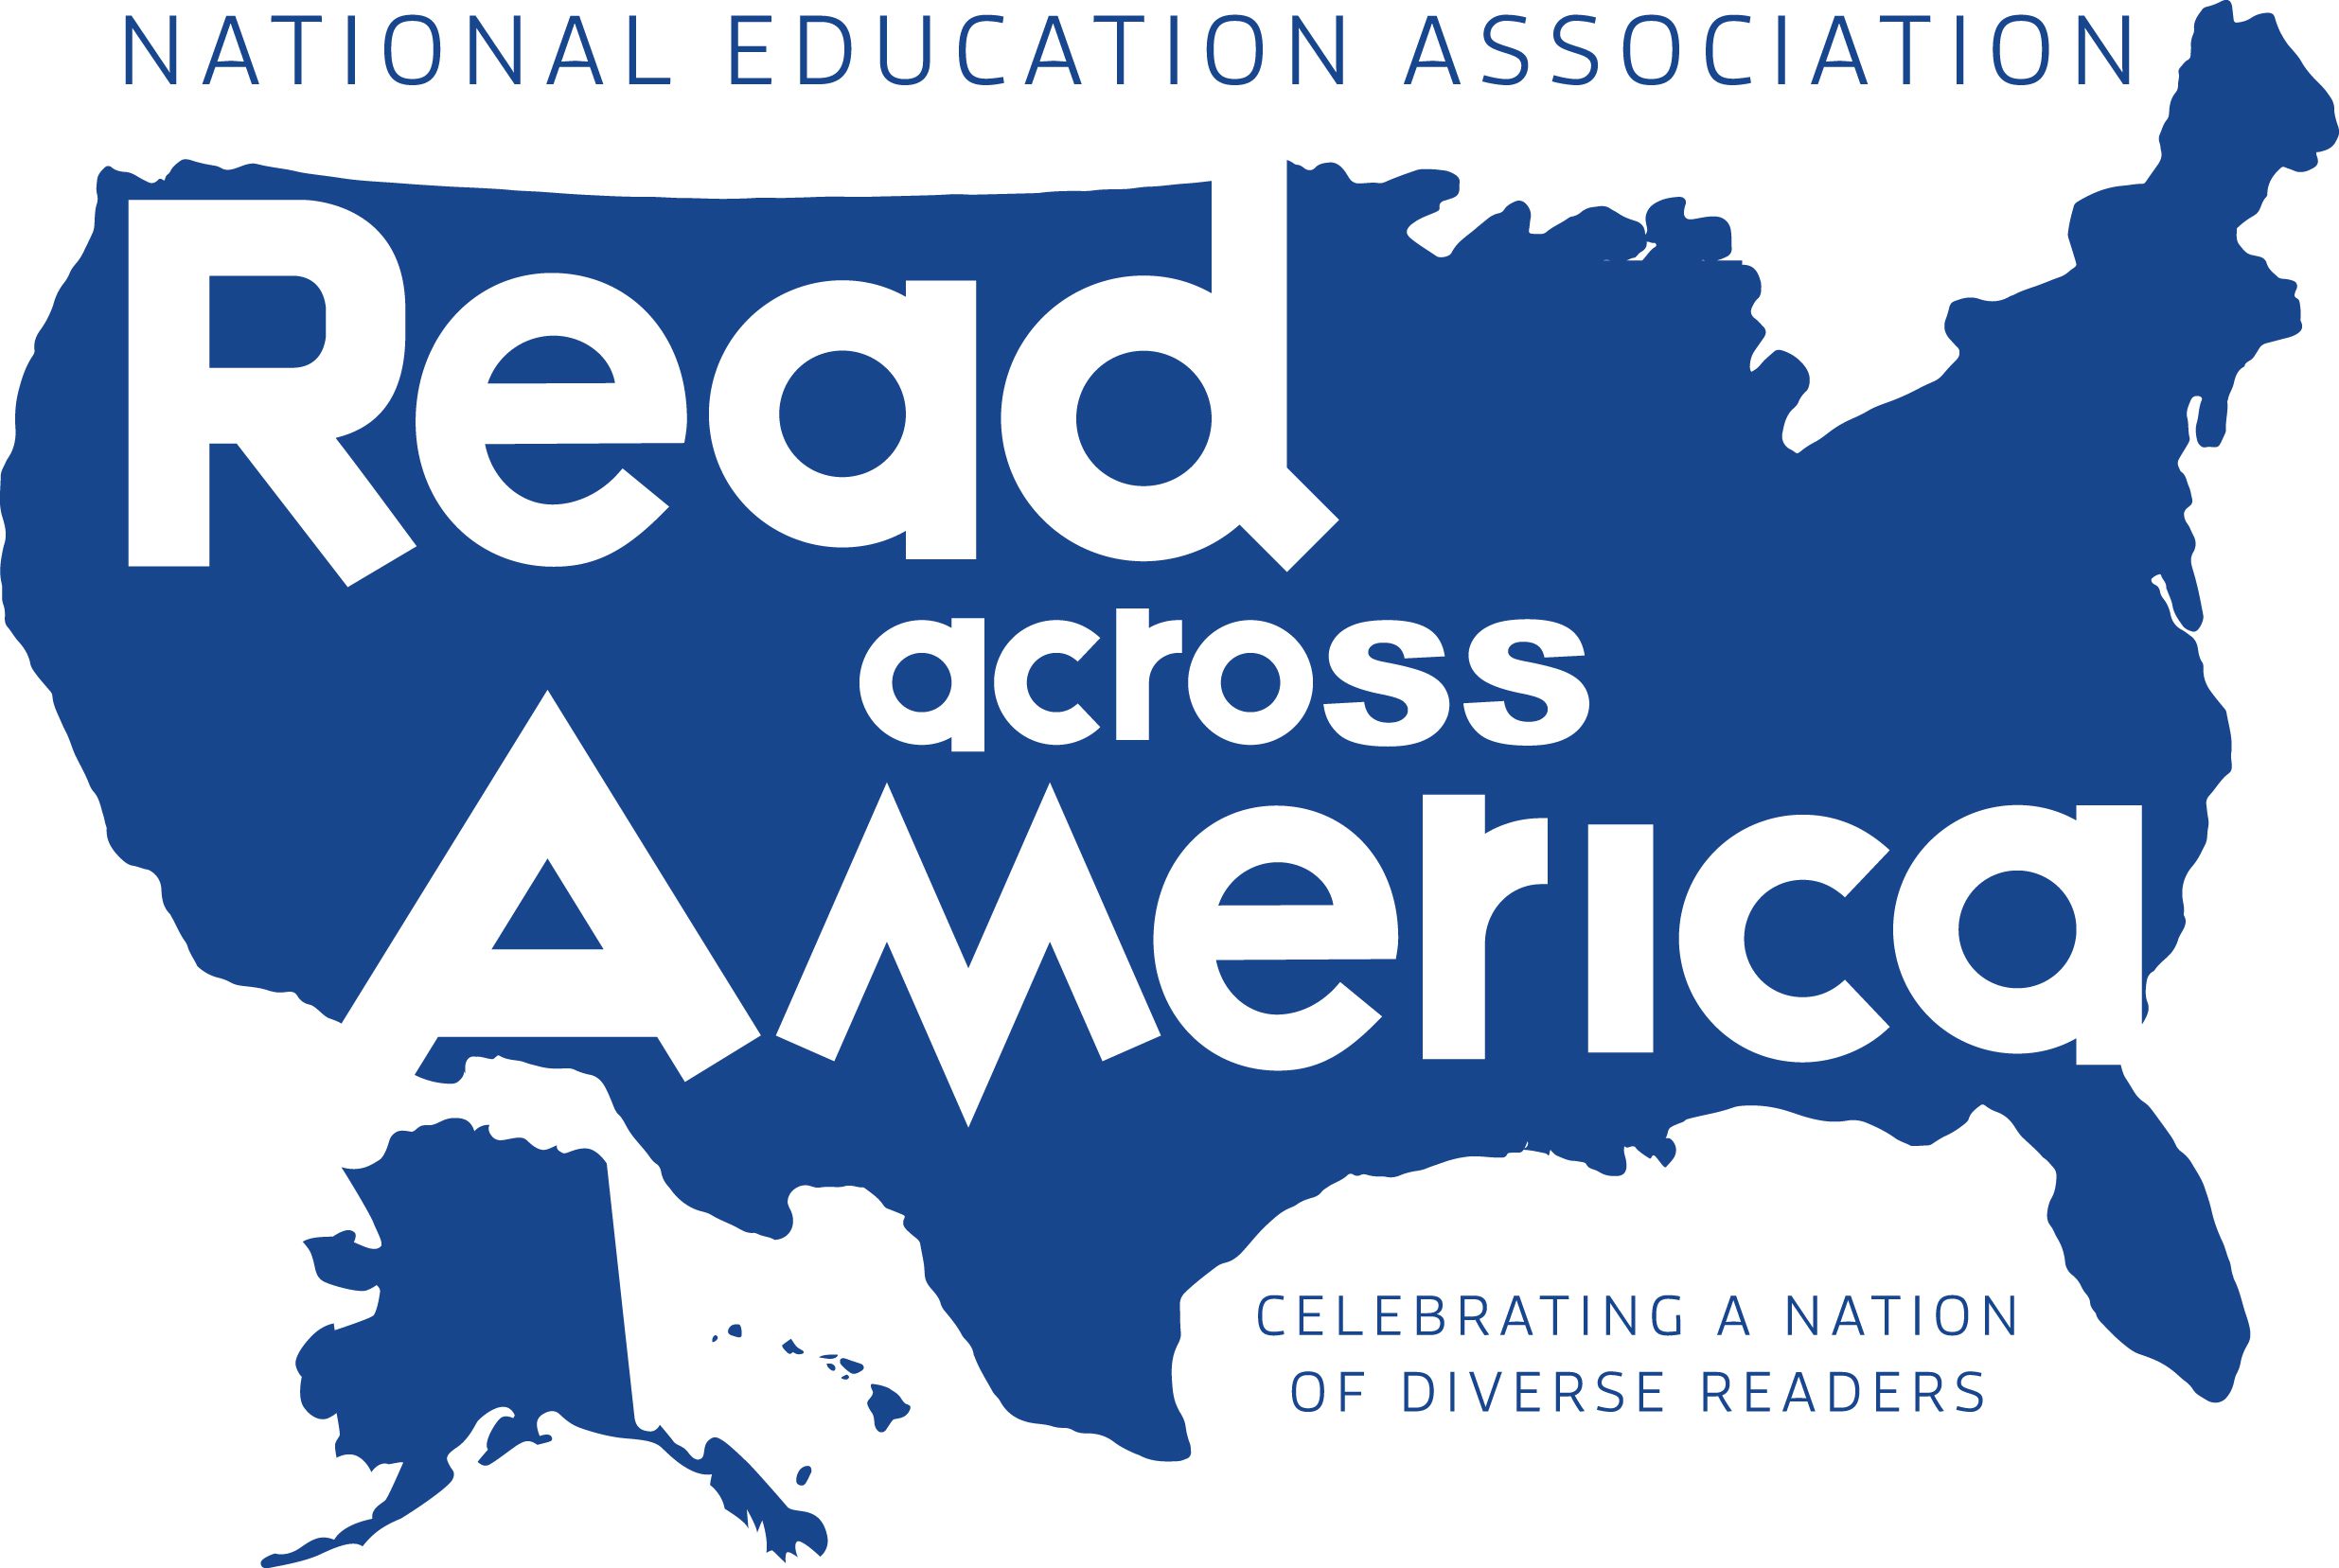 National Education Association Read Across America. Celebrate a nation of diverse readers.